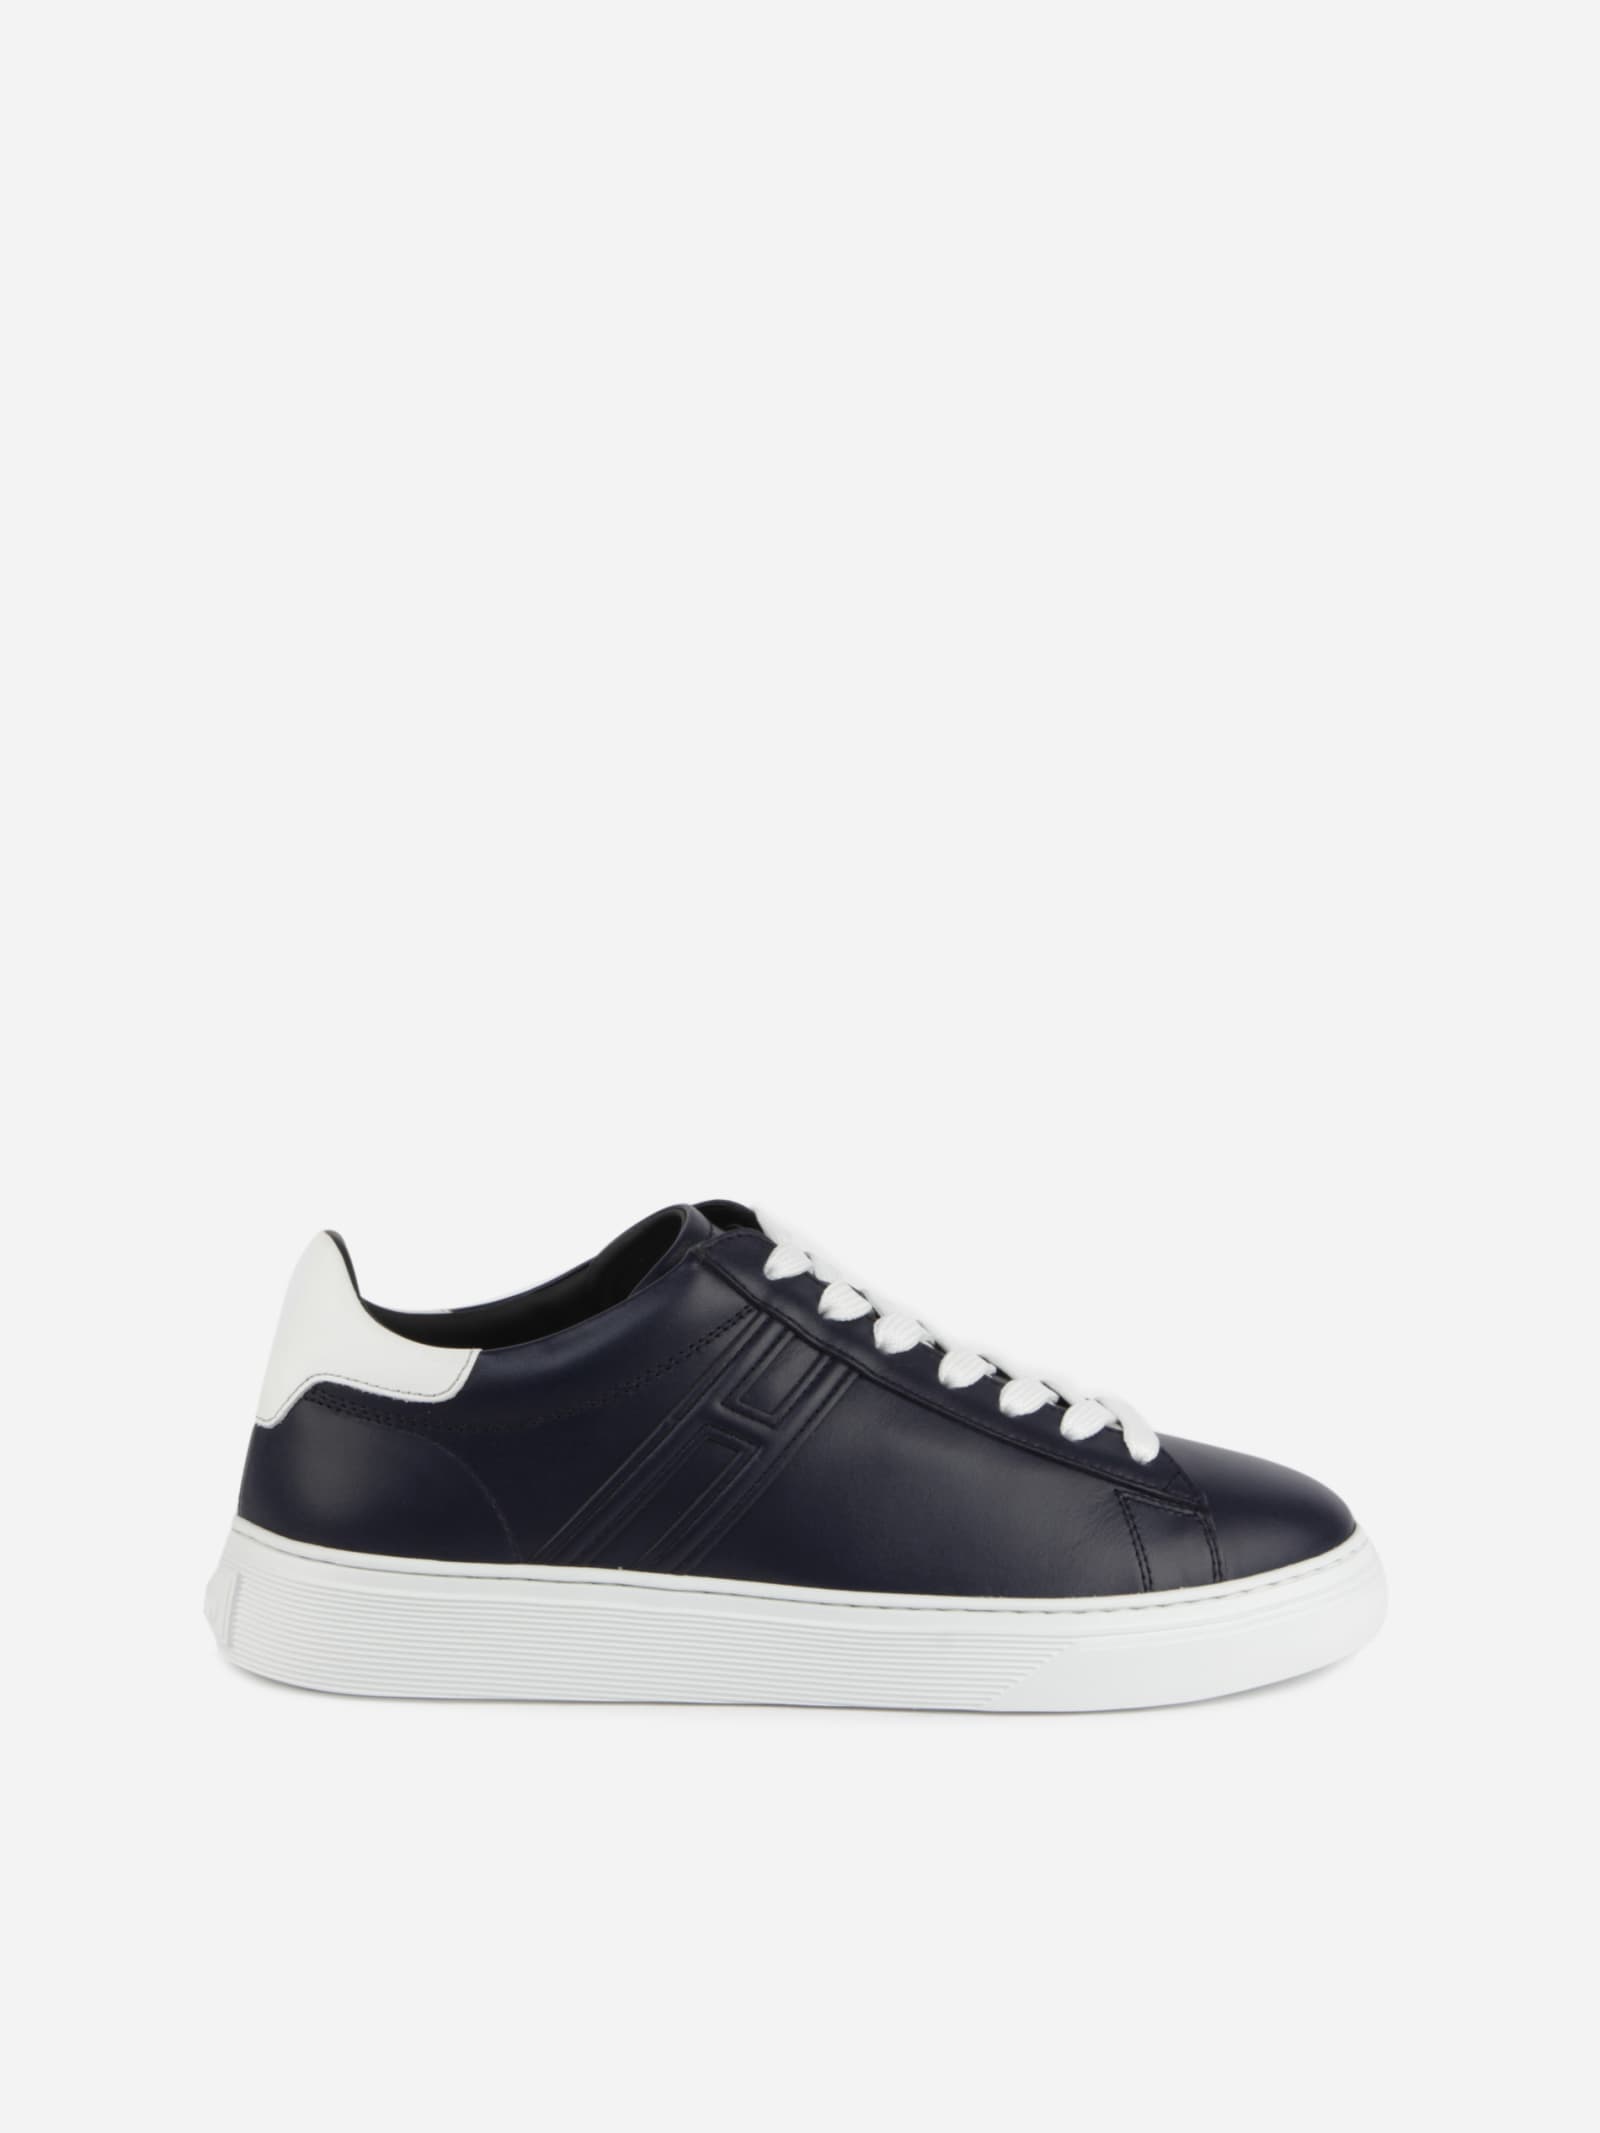 Hogan H365 Sneakers In Leather With Contrasting Heel Tab